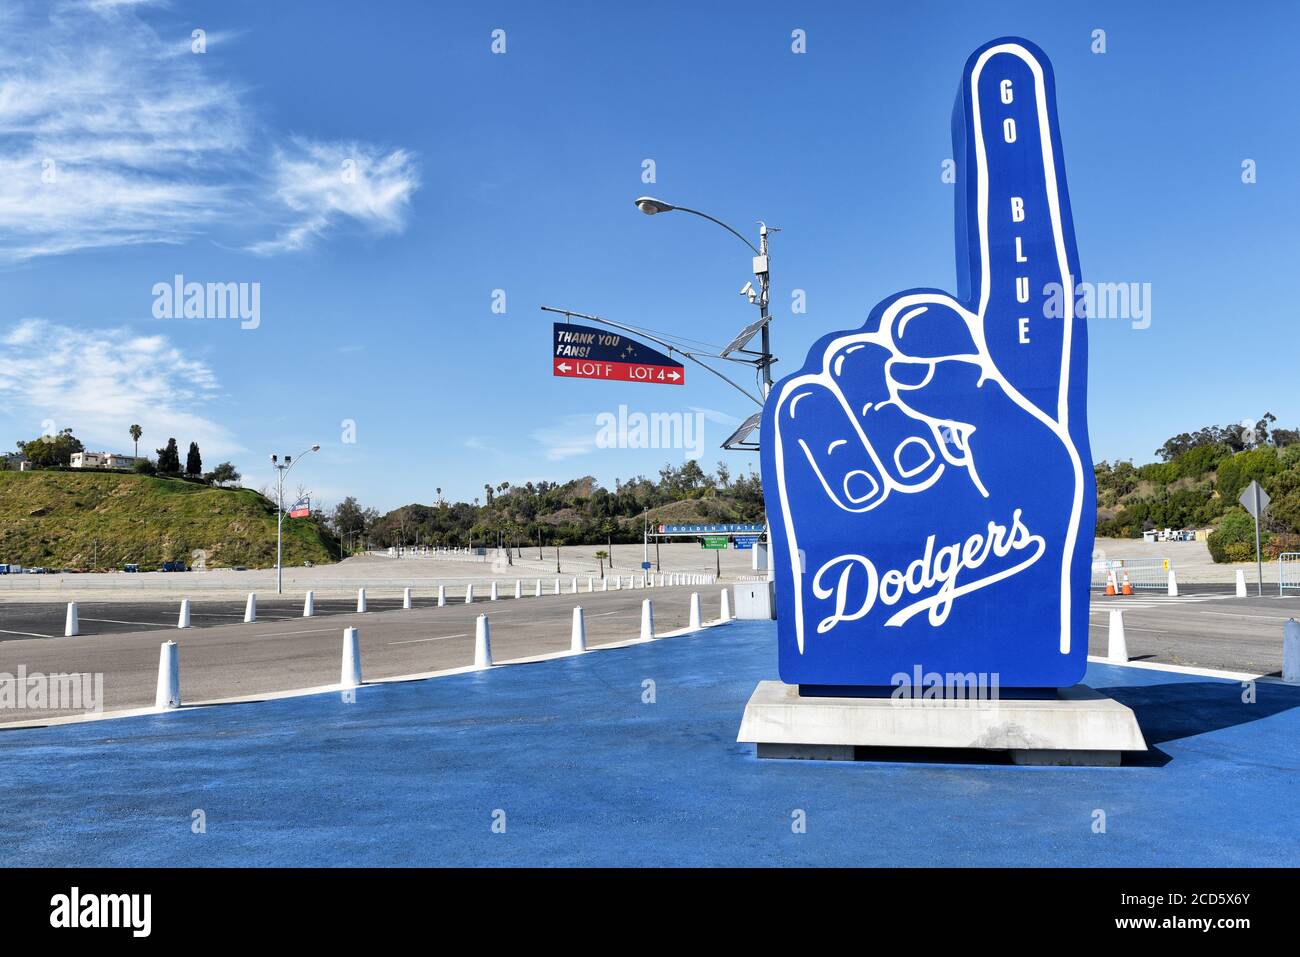 LOS ANGELES, CALIFORNIA - 11 FEB 2020: A Number 1 hand figure with Go Blue at Dodger Stadium. Stock Photo